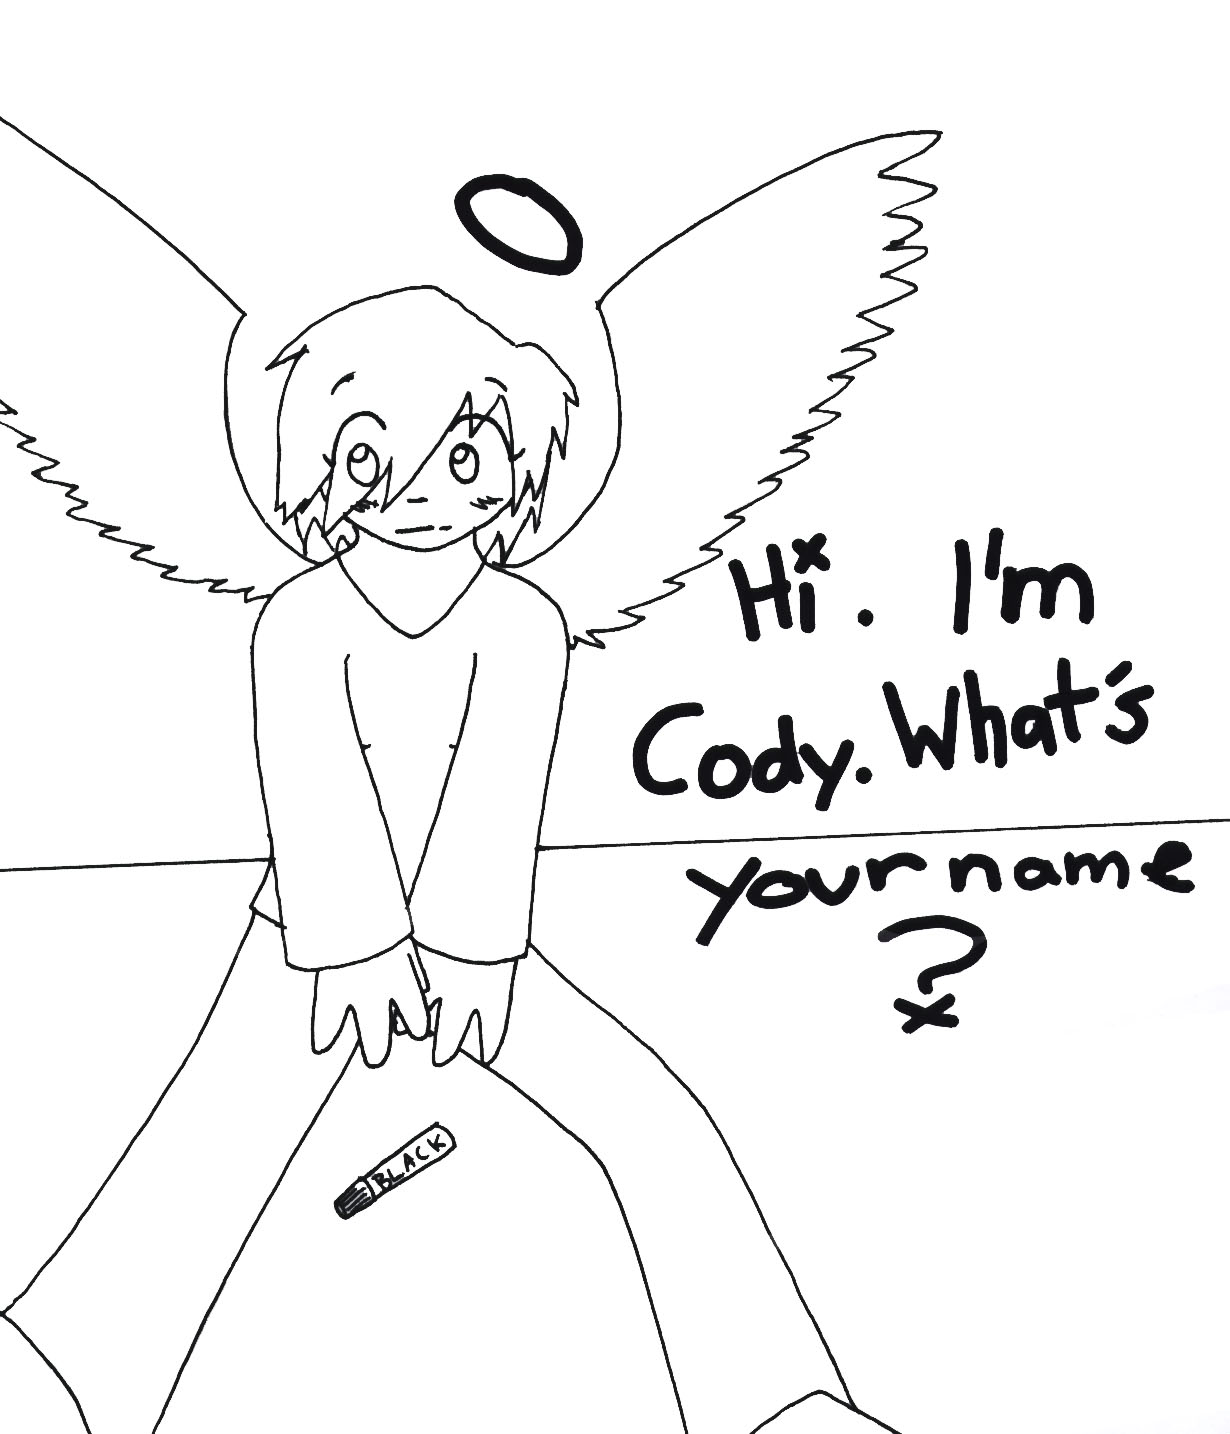 Hi. I'm Cody what's your name? by AJay-the-Pyro